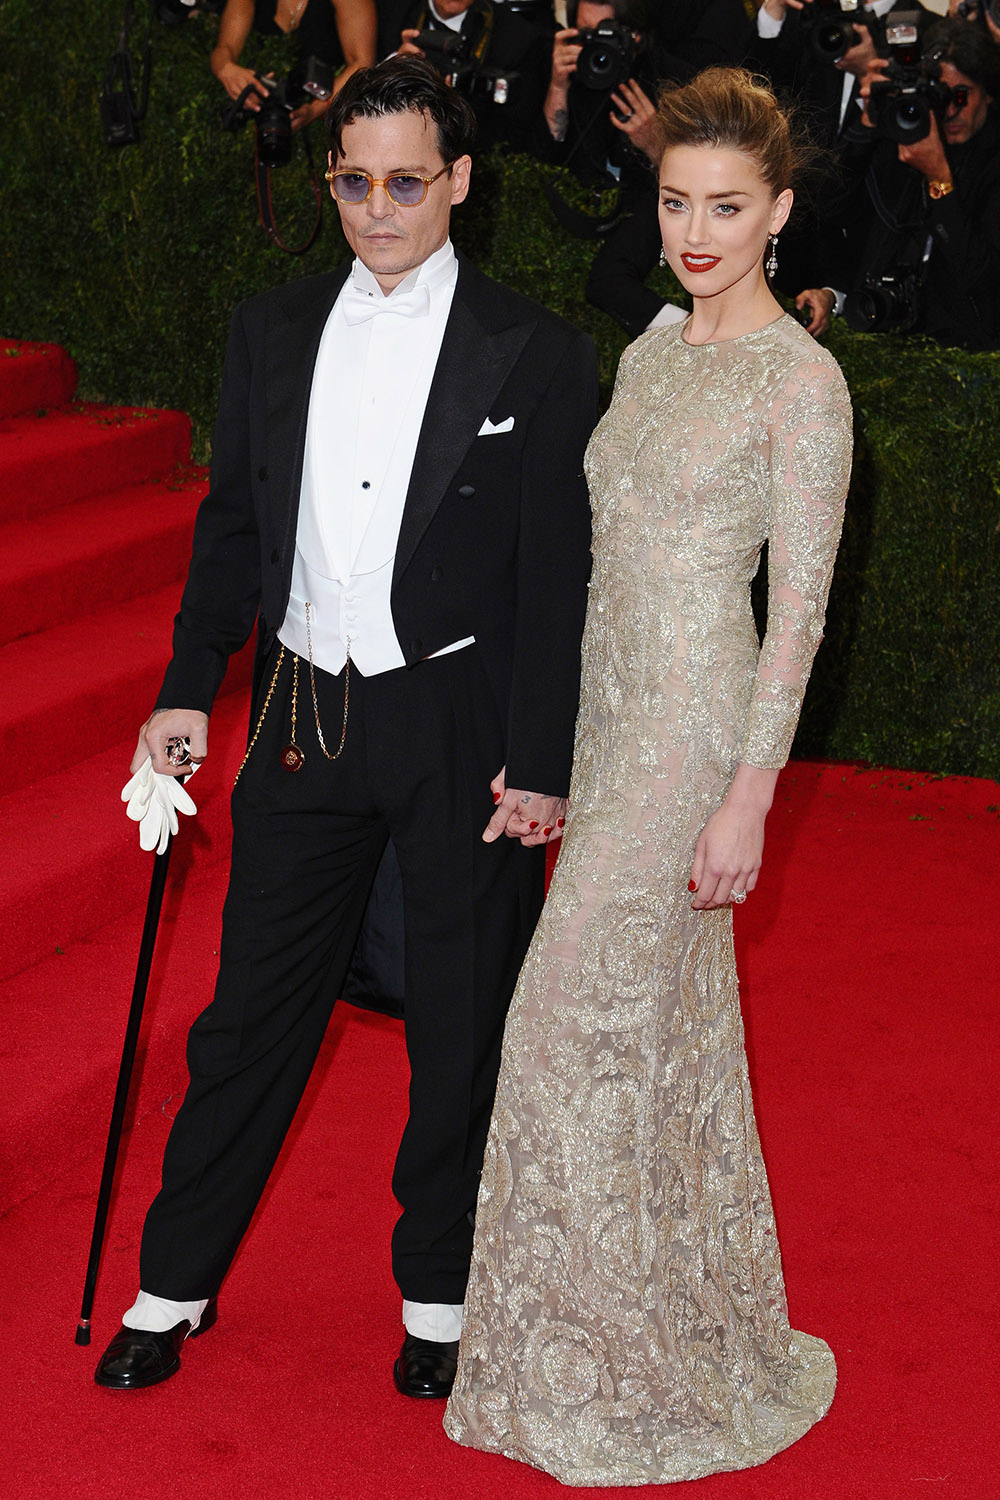 Johnny and Amber look every inch the Hollywood couple at the 2014 Costume Institute Gala at the Metropolitan Museum of Art celebrating the Charles James: Beyond Fashion exhibit in May, 2014.